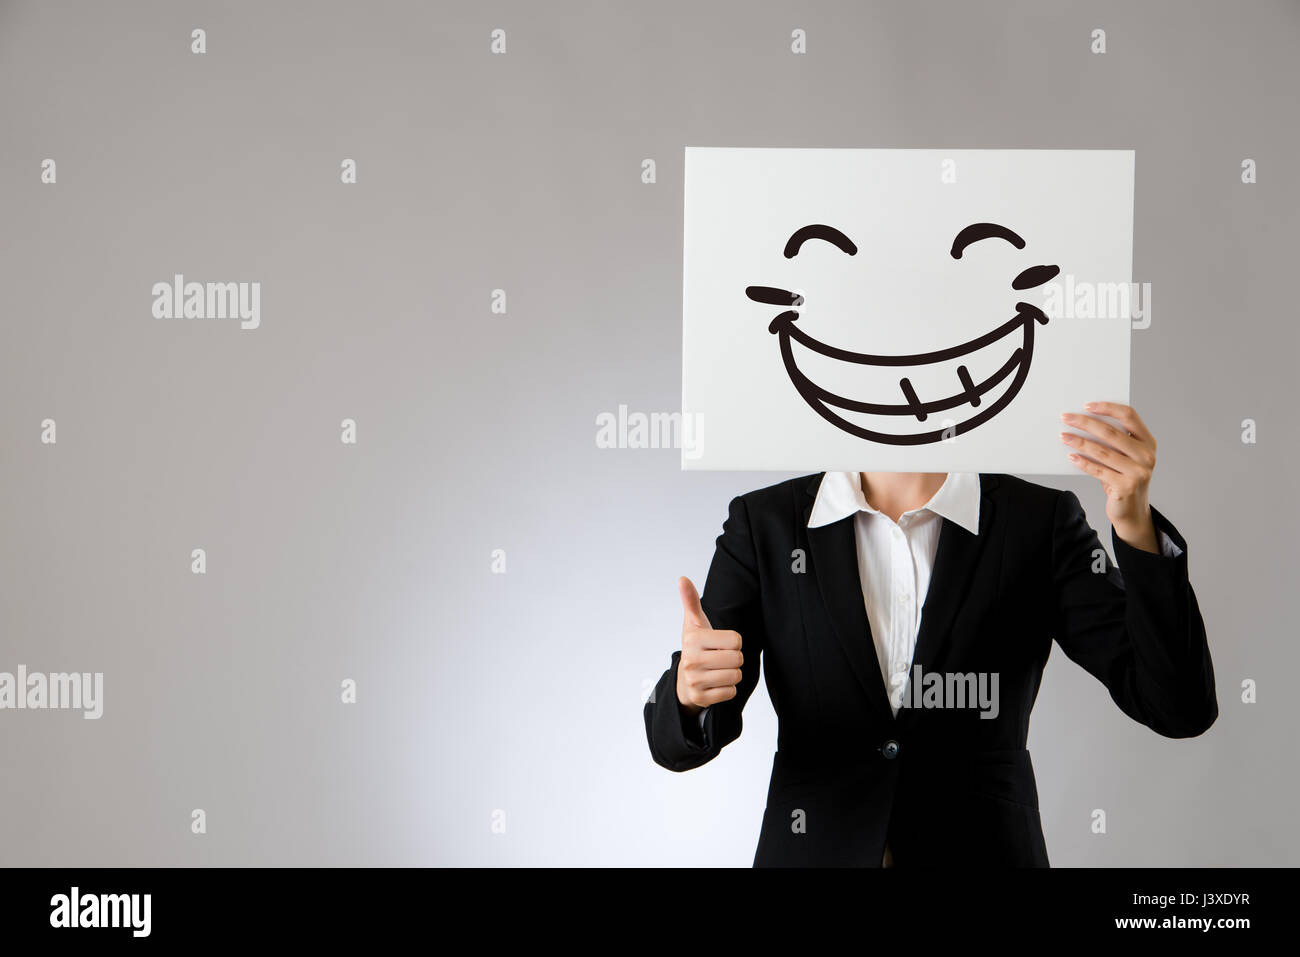 laughing business office lady holding blank white board with thumbs up hand gesture. isolated on gray background. business office company concept. Stock Photo